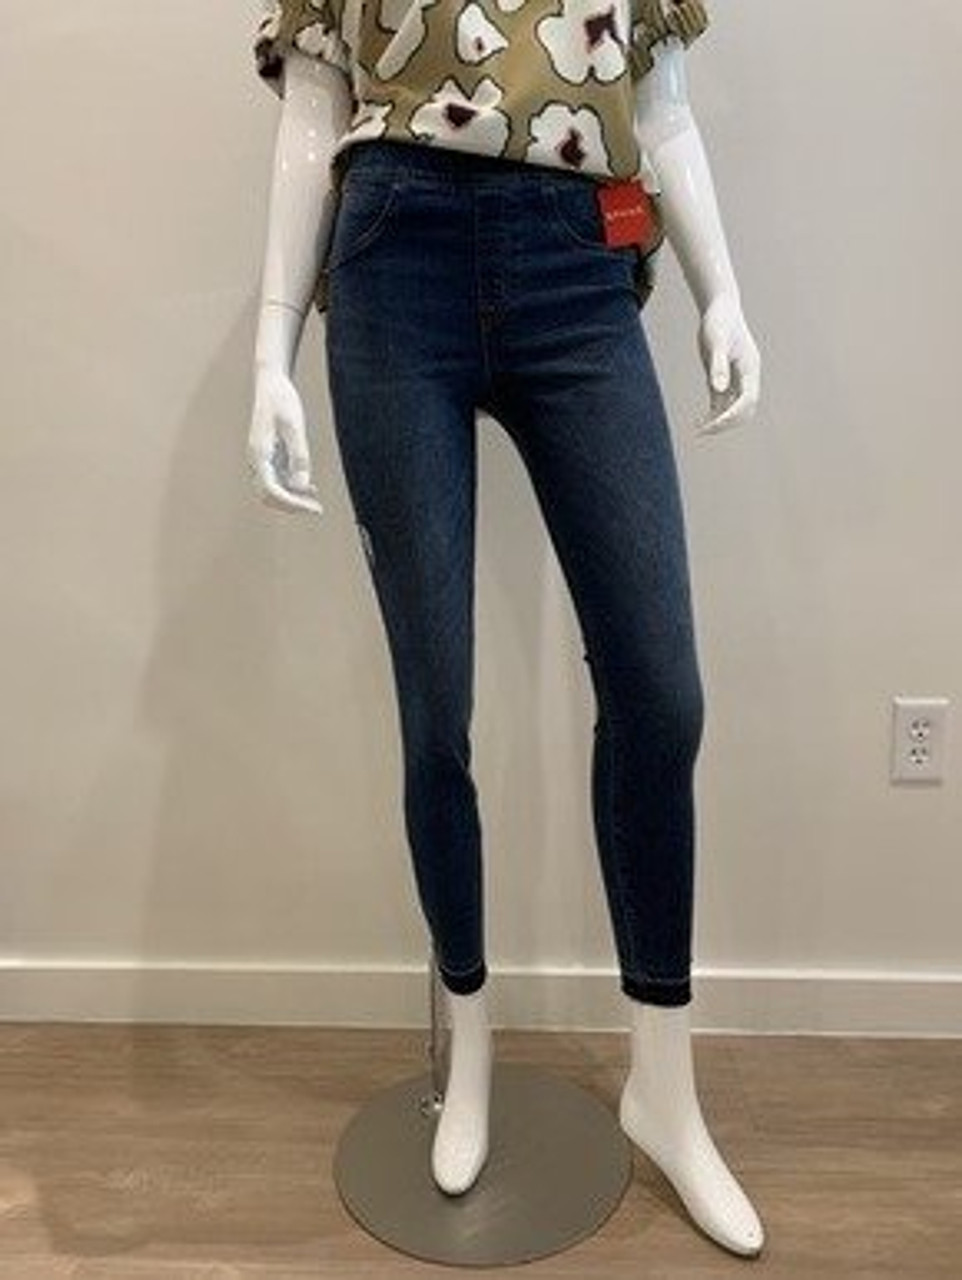 Distressed Ankle Skinny Jeans - Monkee's of Winter Park